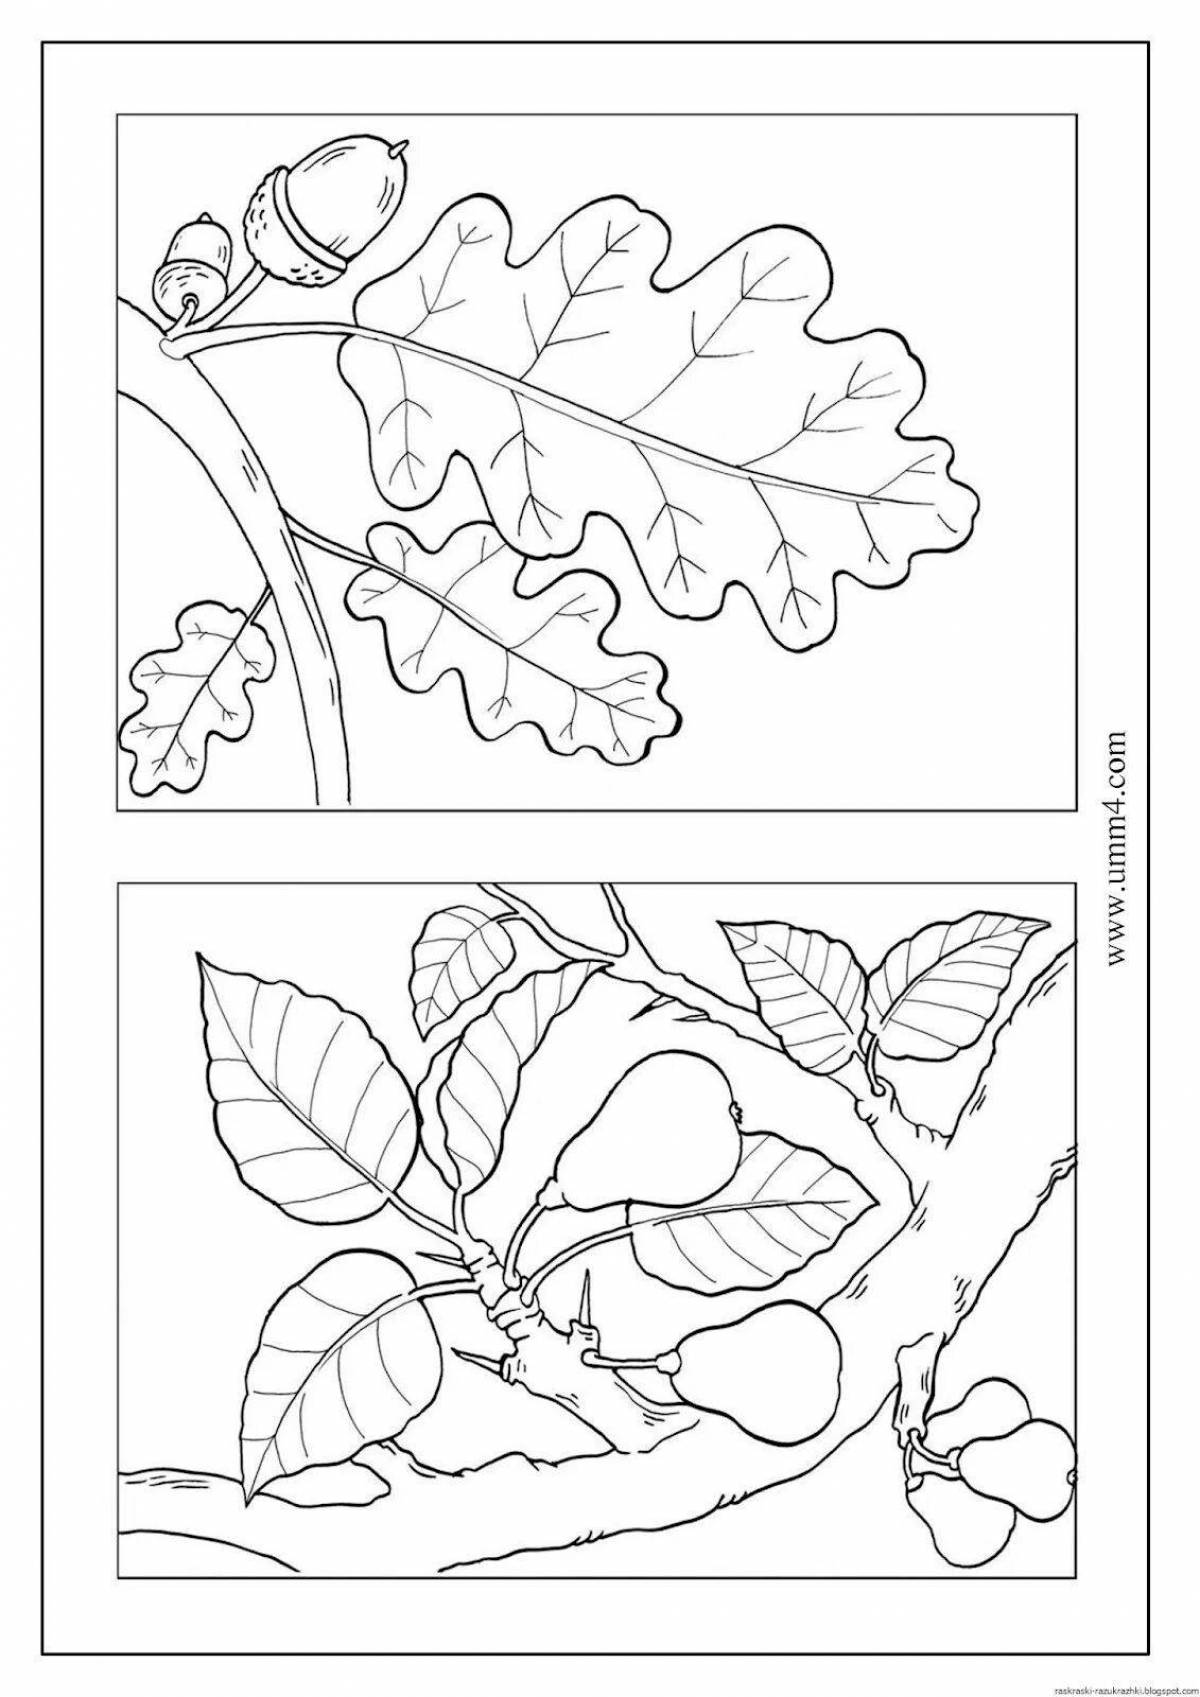 Creative coloring page 2 drawings